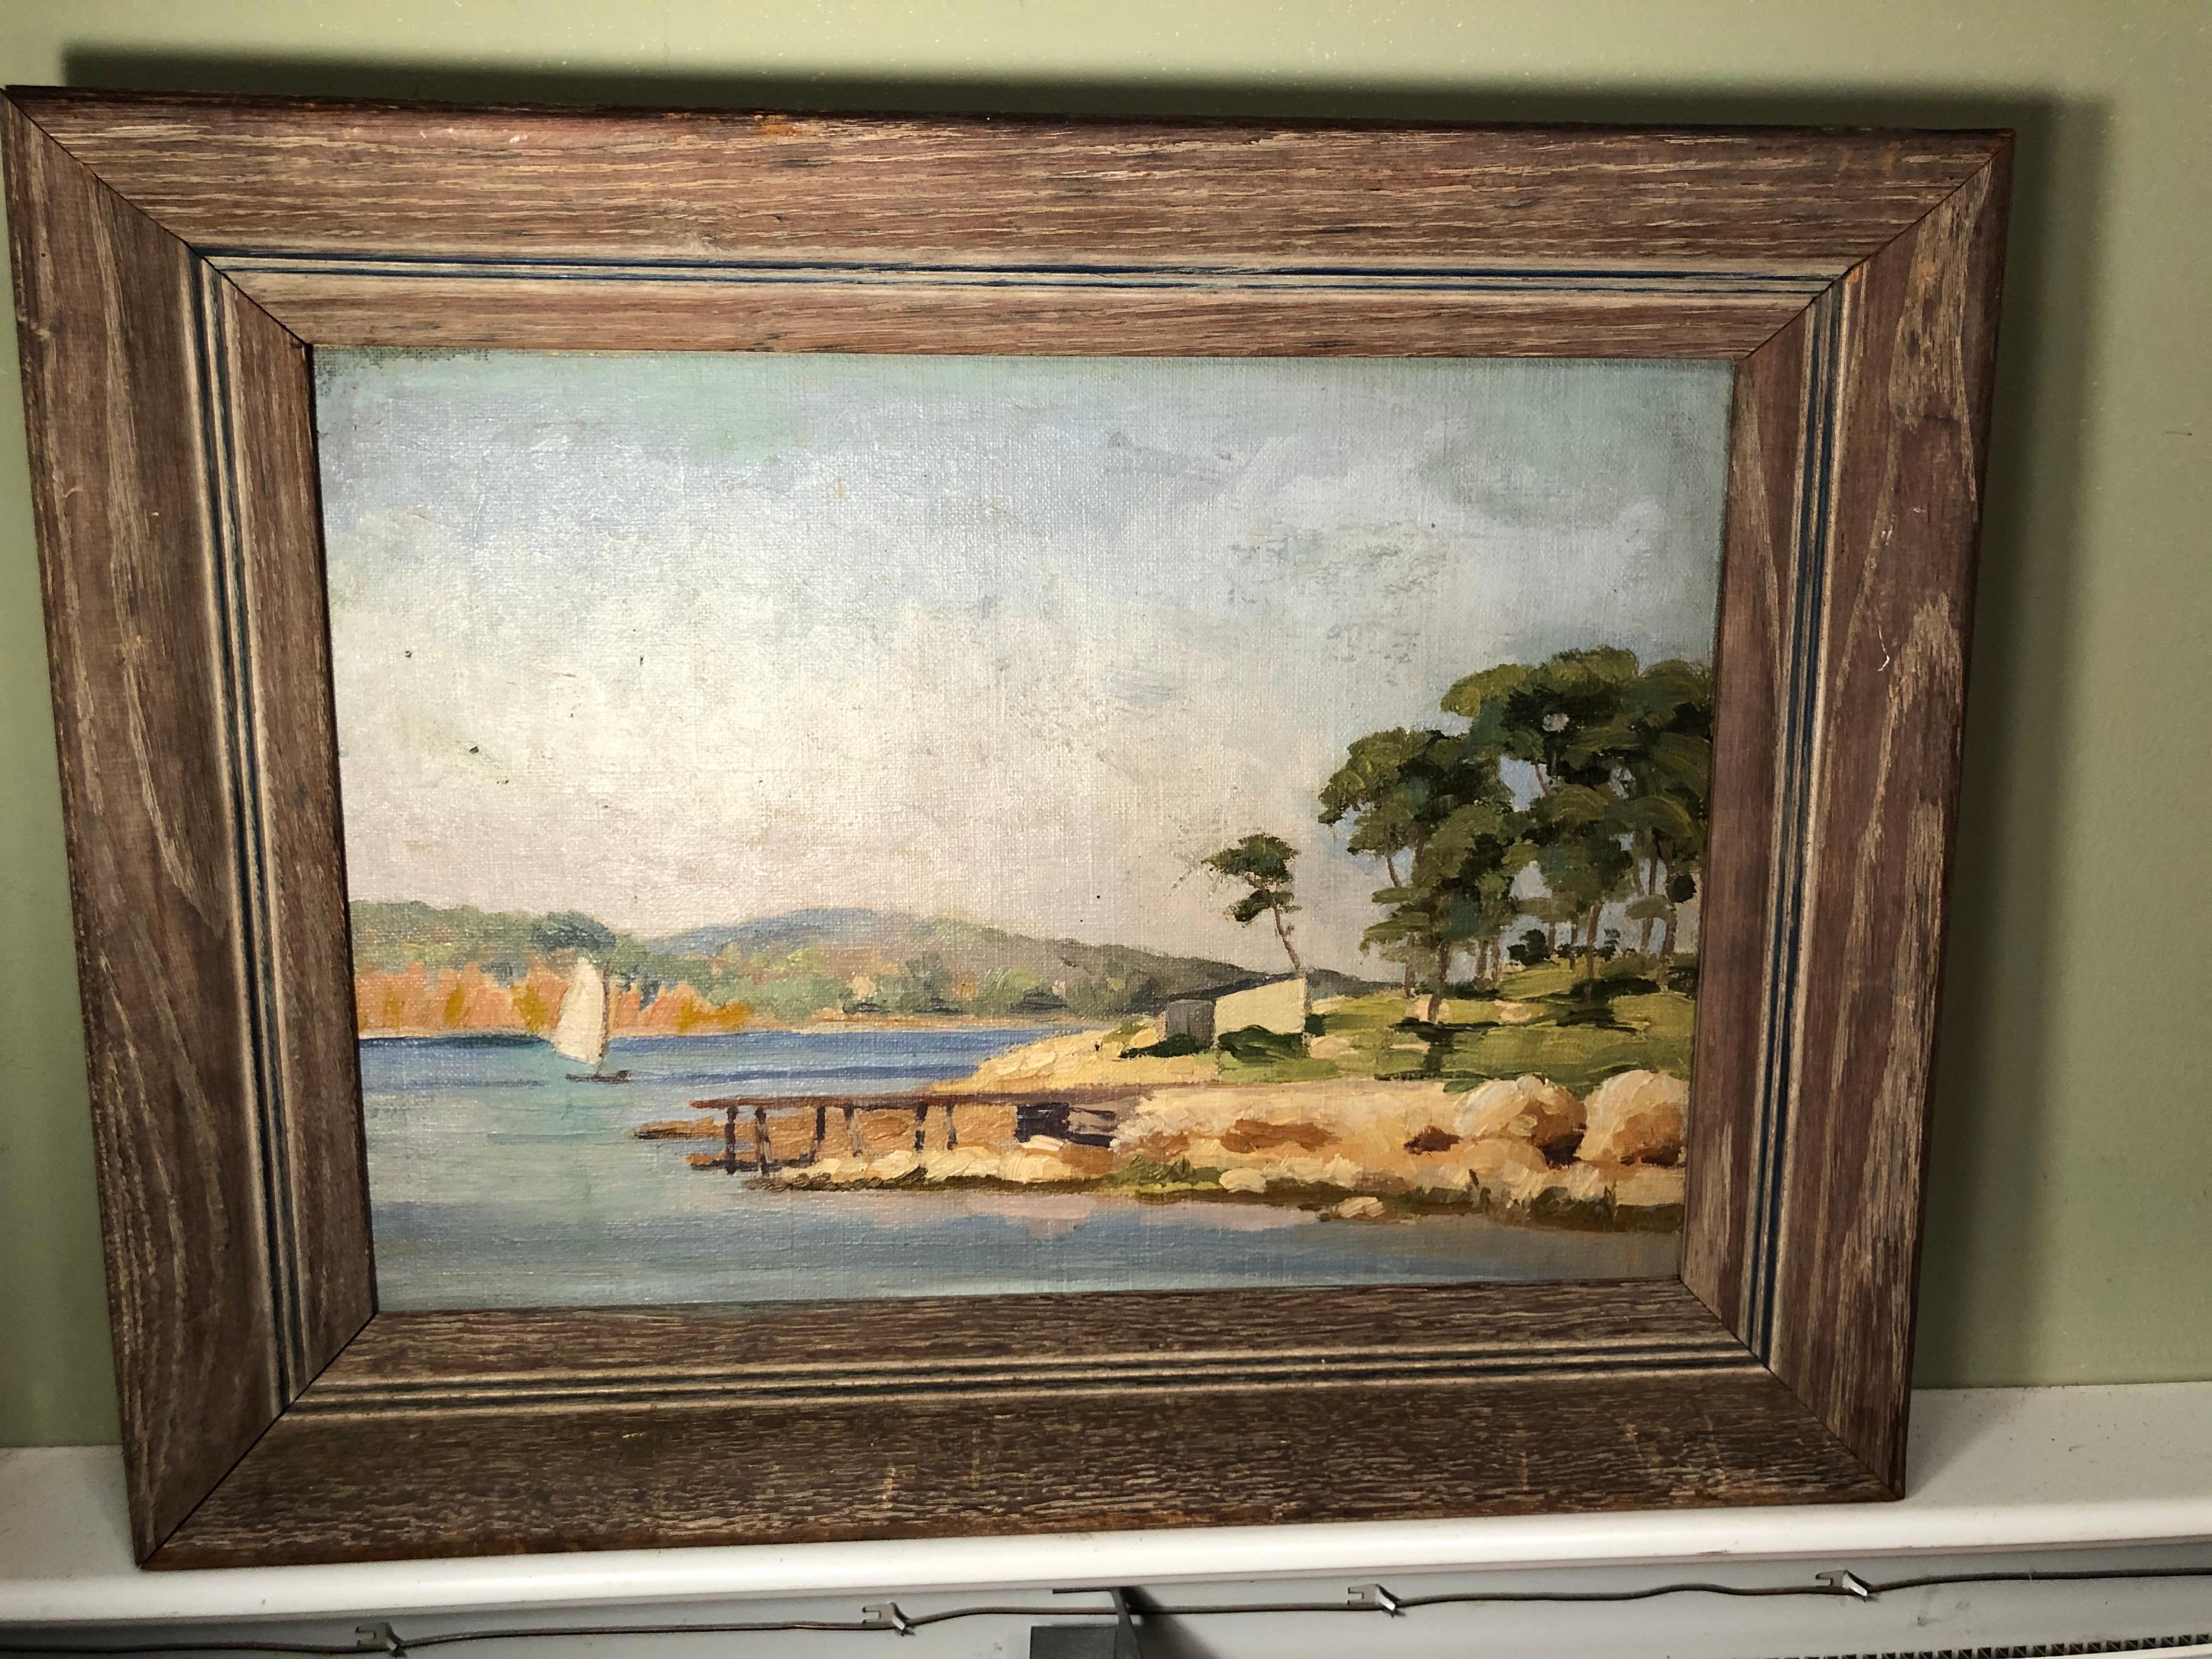 Painting of a tropical coastal scene. Oil on canvas with solid wooden frame.